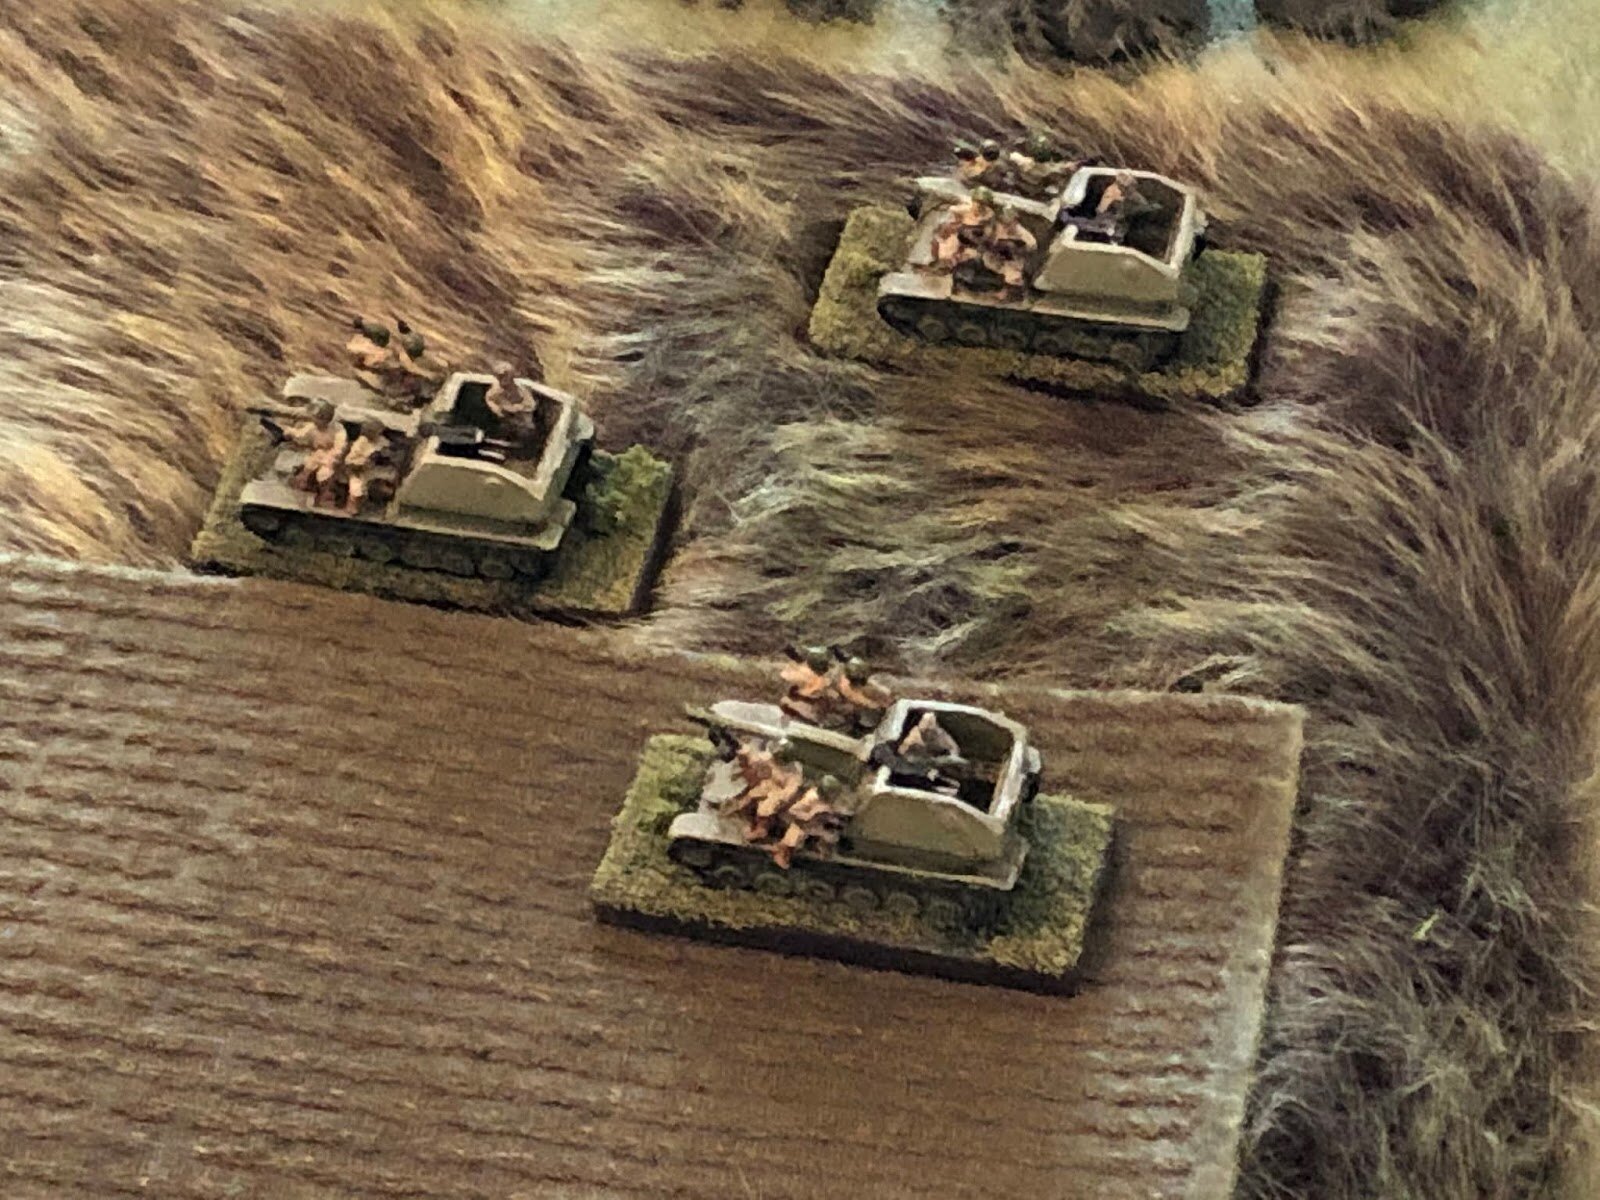  The Su-76s, carrying a platoon of infantry.  I'm so happy with those tank riders, they're awesome! 